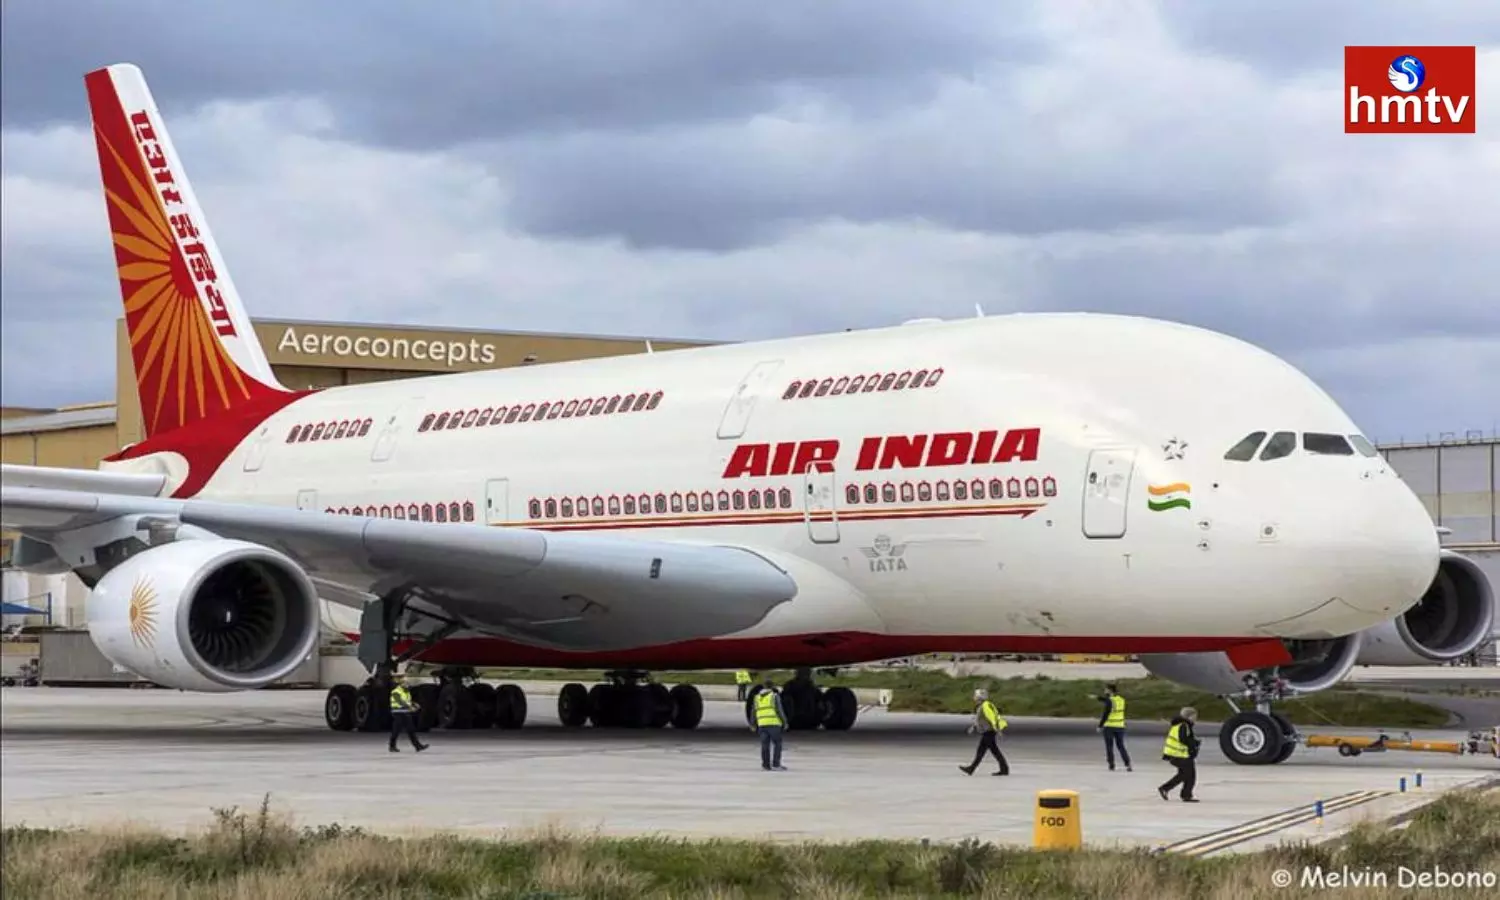 A Review Of Alcohol On International Air India Flights